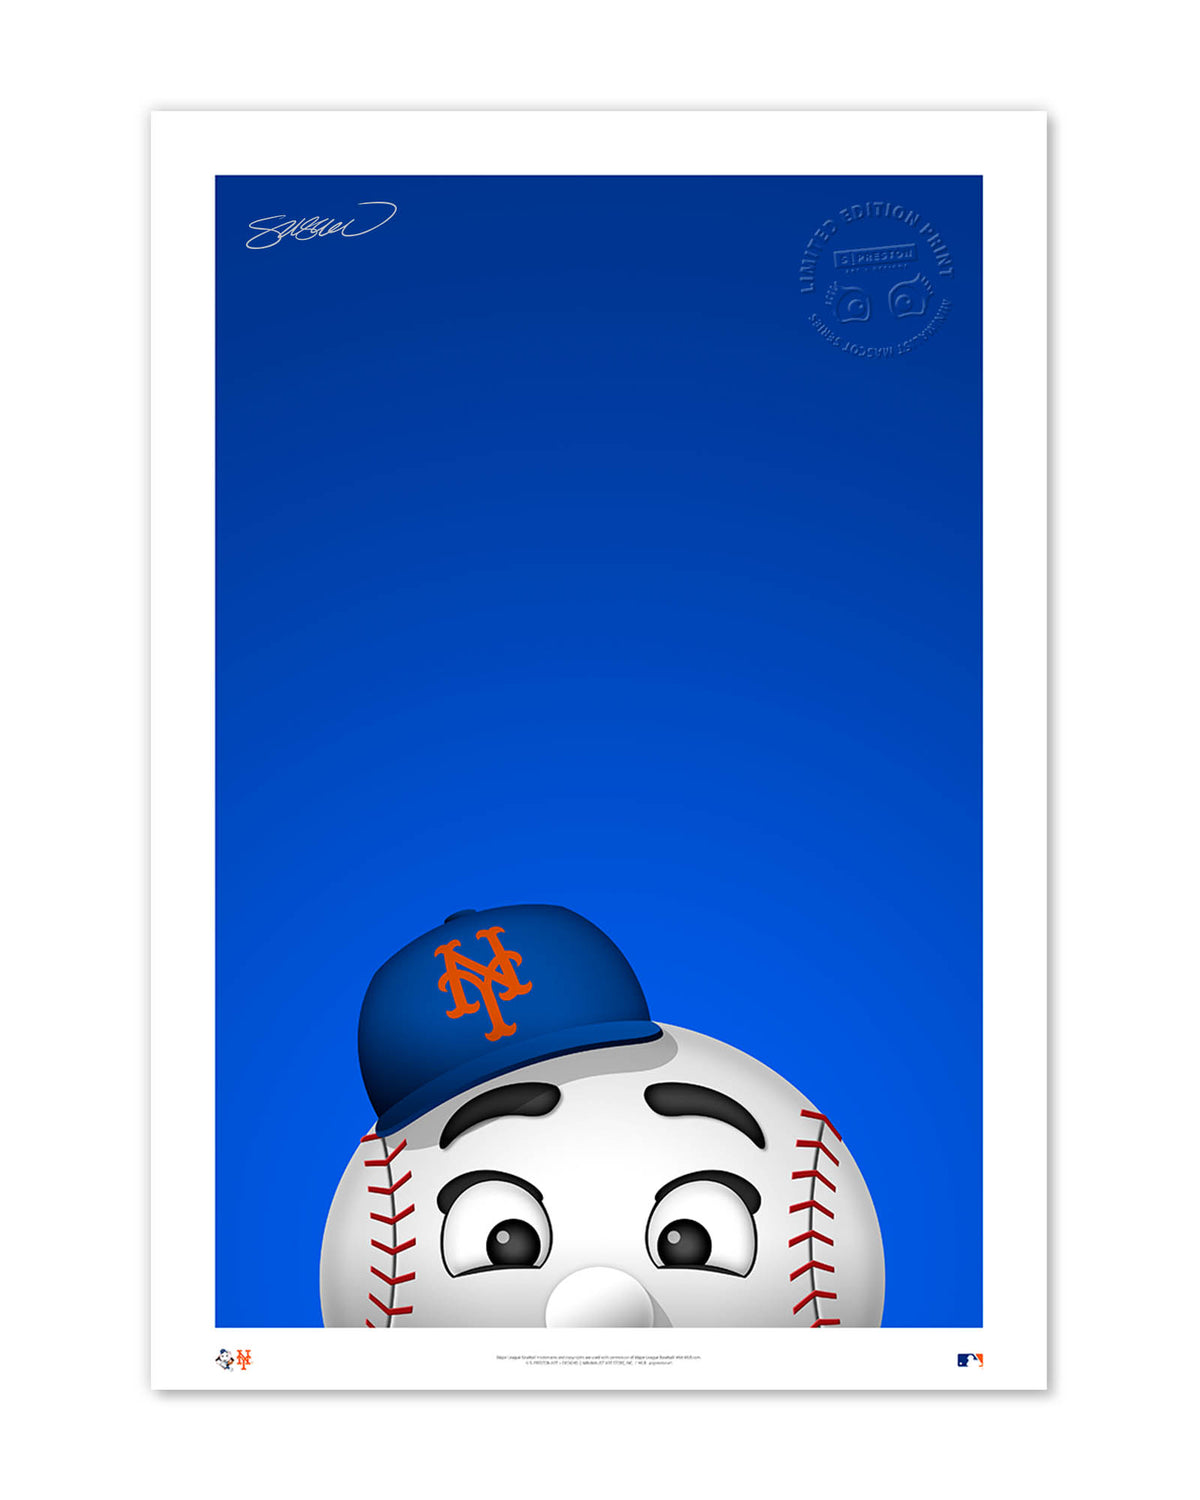 Mets Taiwan Day 2020 to offer limited edition 'Taiwan No. 1